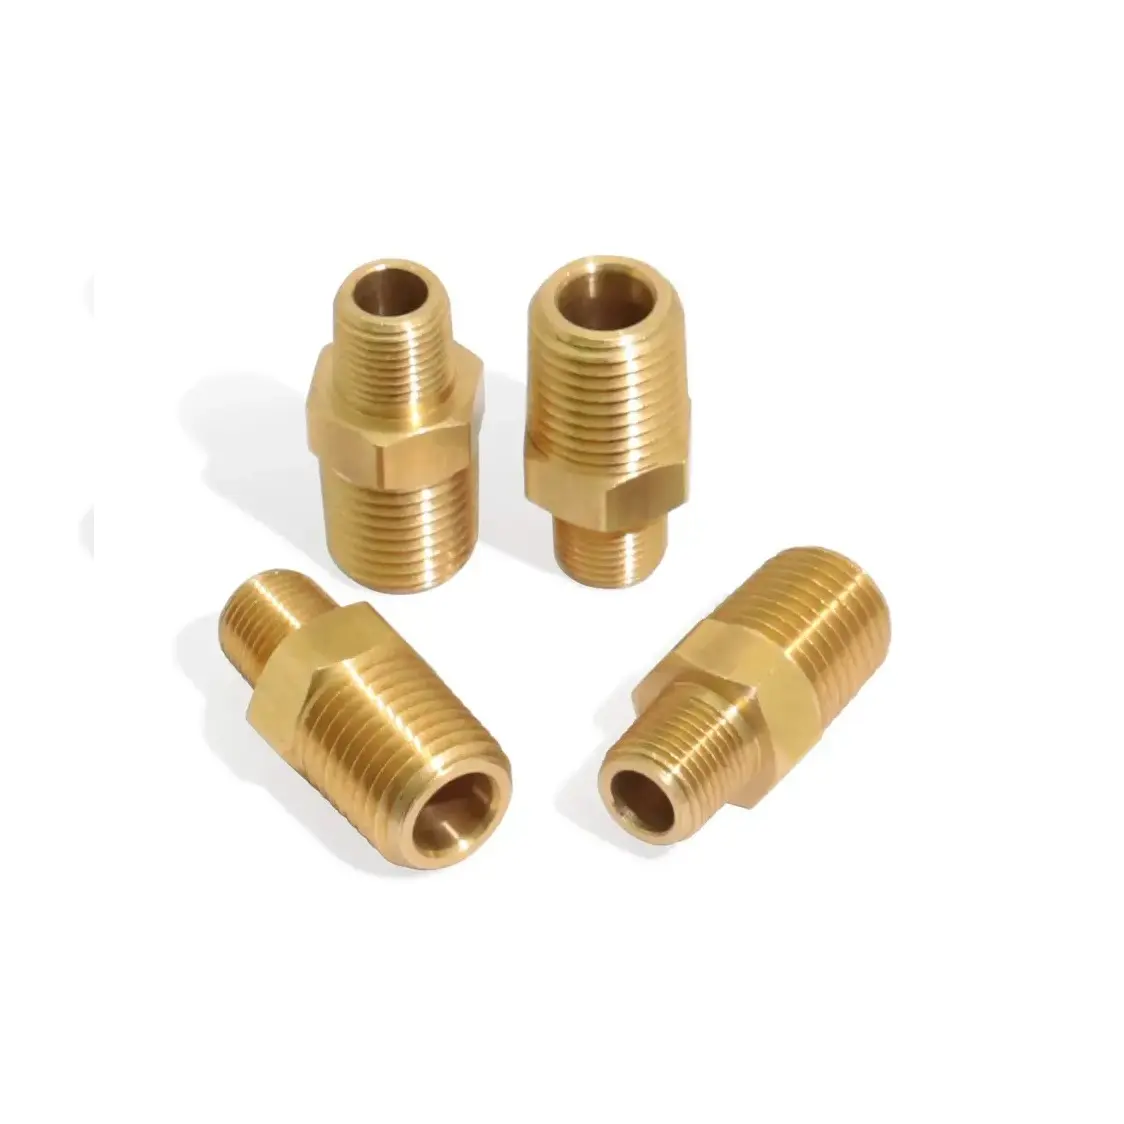 Wholesale Supply Brass Nipples Connect the Pipe to Valve Instrument or Another Pipe Available in Custom Packaging from India